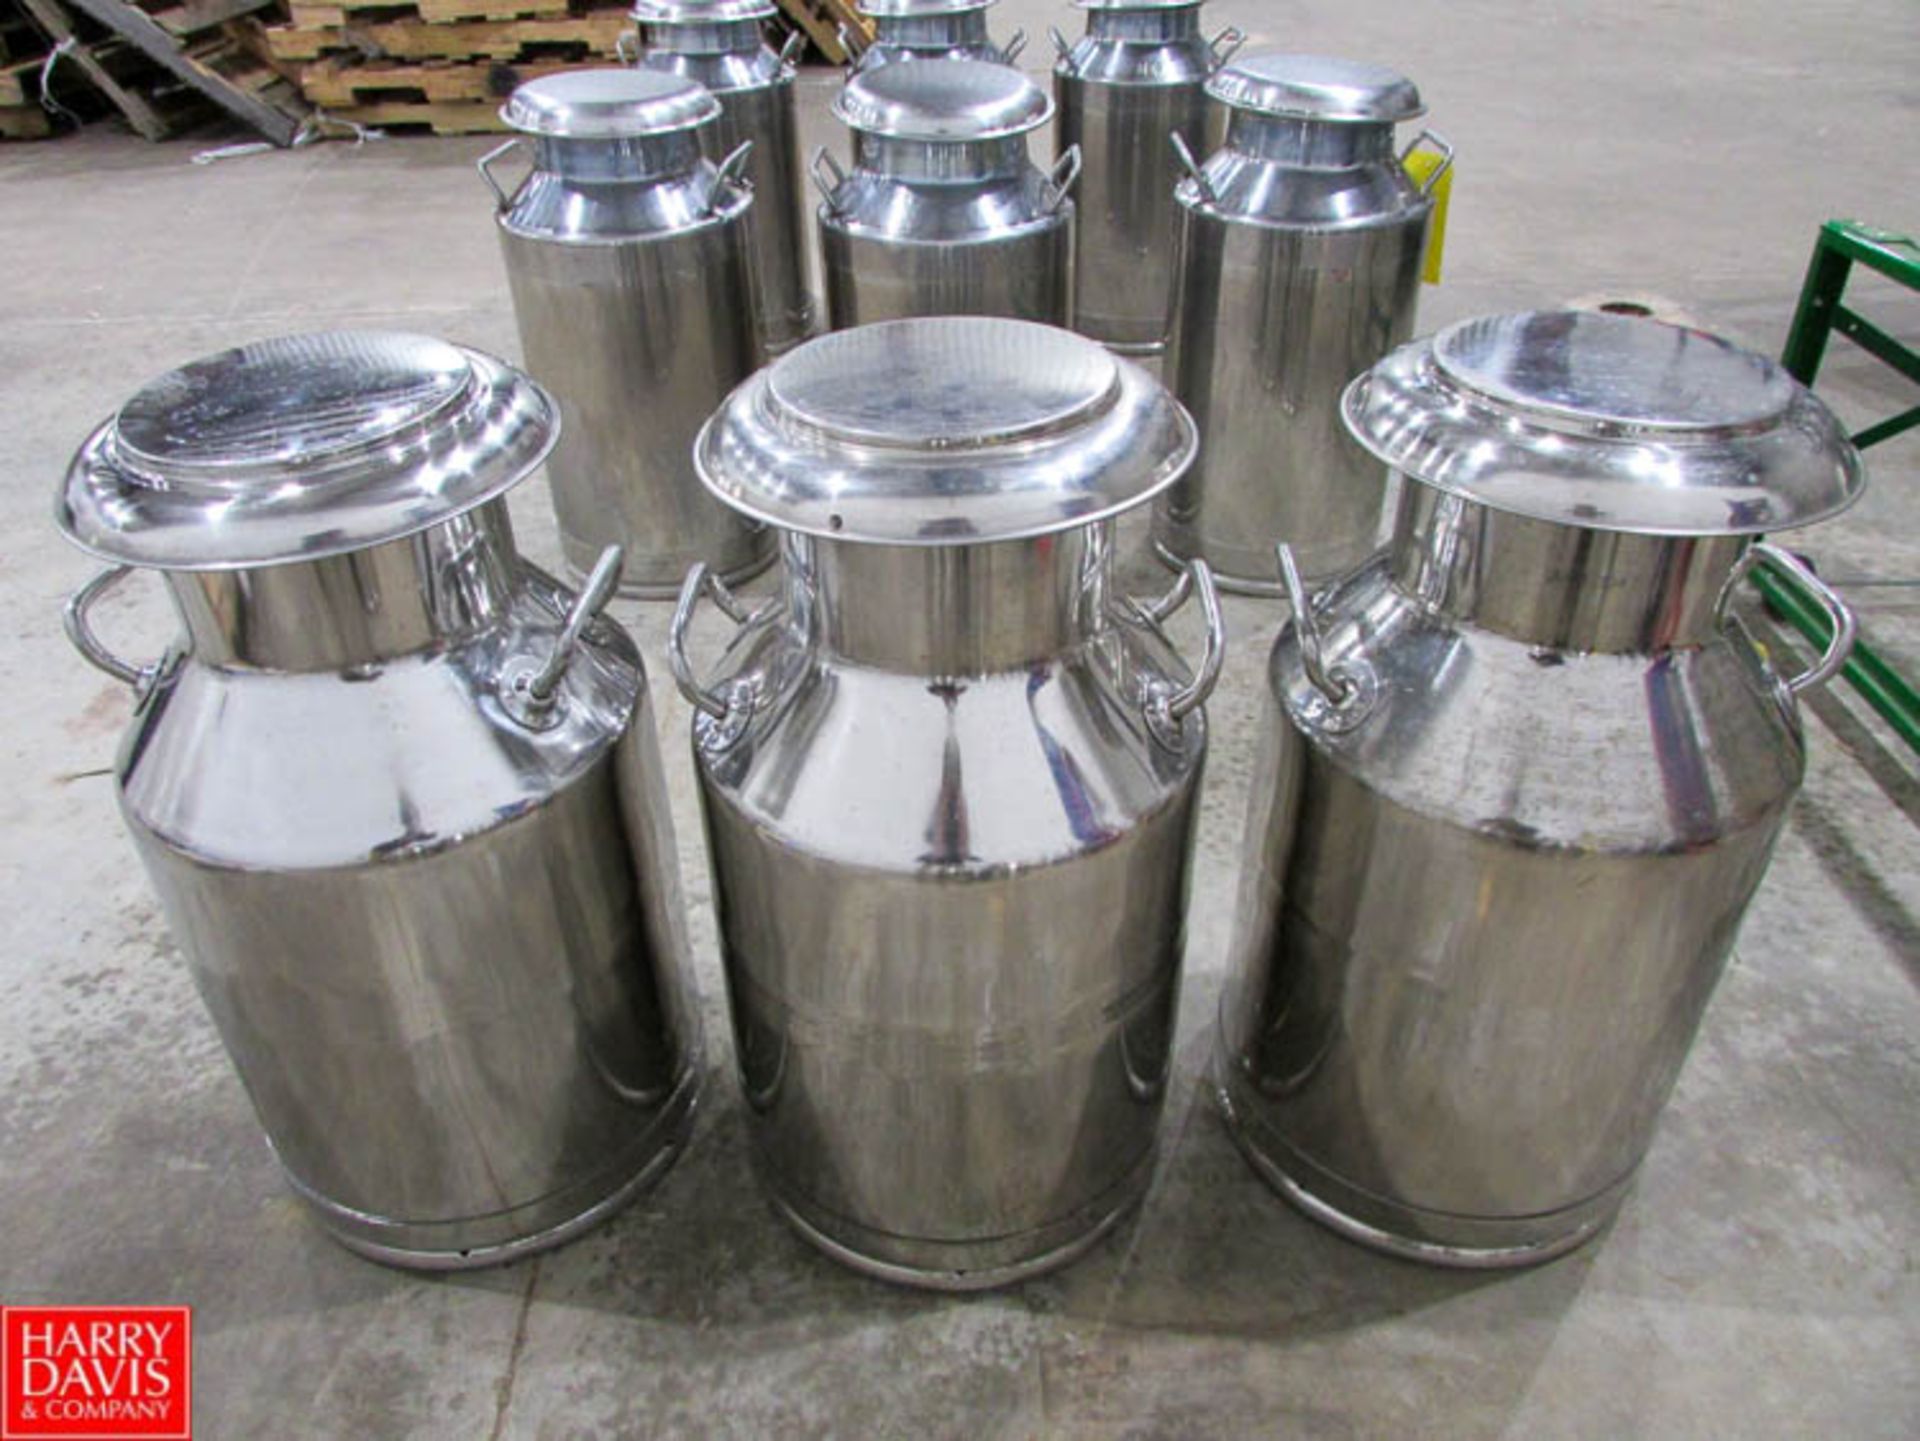 10 Gallon S/S Milk Cans with Lids Rigging Fee: $ 30 - Image 2 of 2